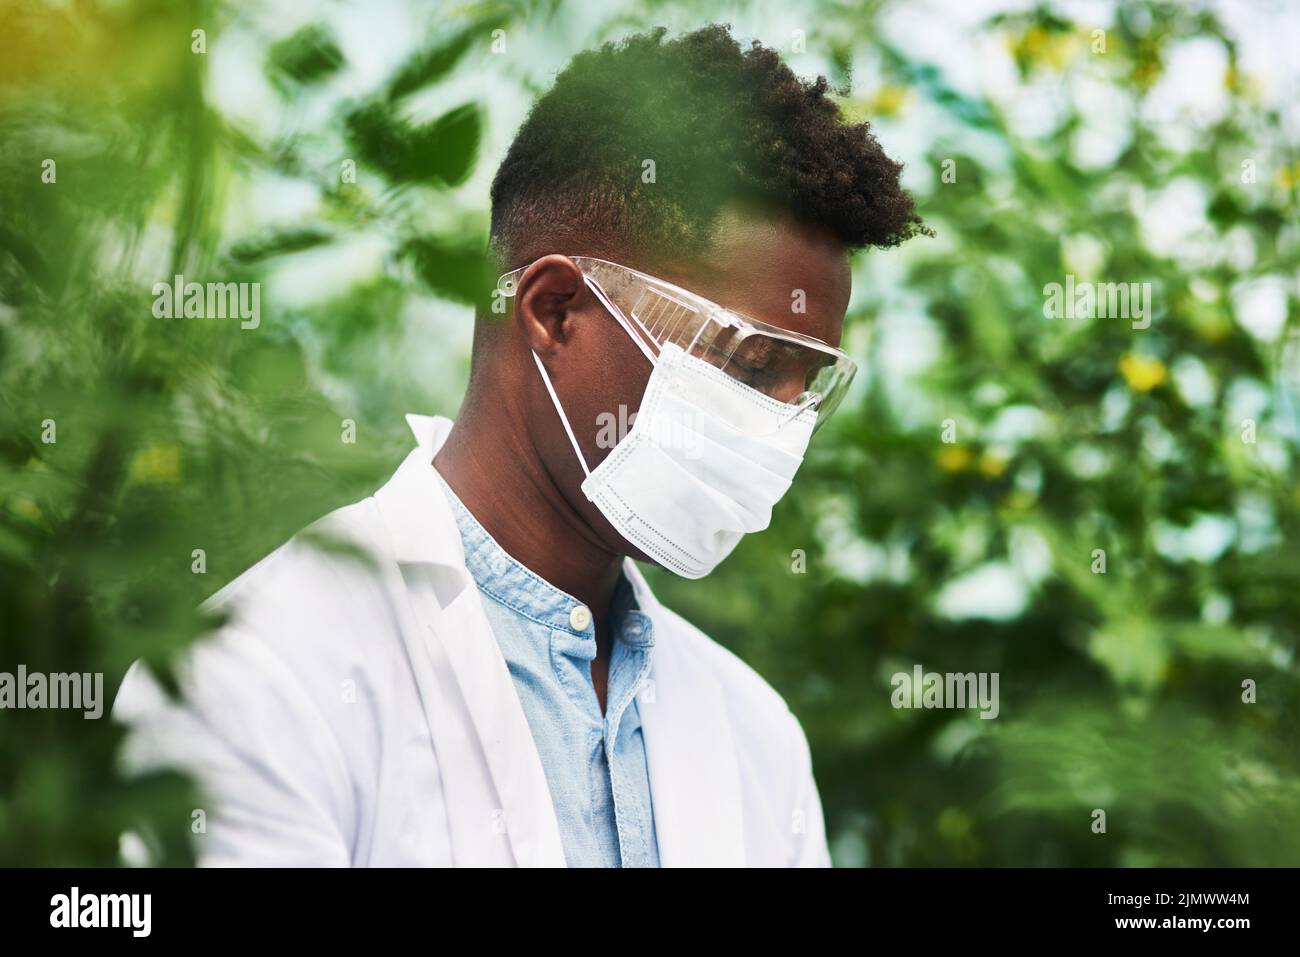 You first have to protect yourself against plant allergies. a young botanist wearing protective eye and face gear while working outdoors in nature. Stock Photo